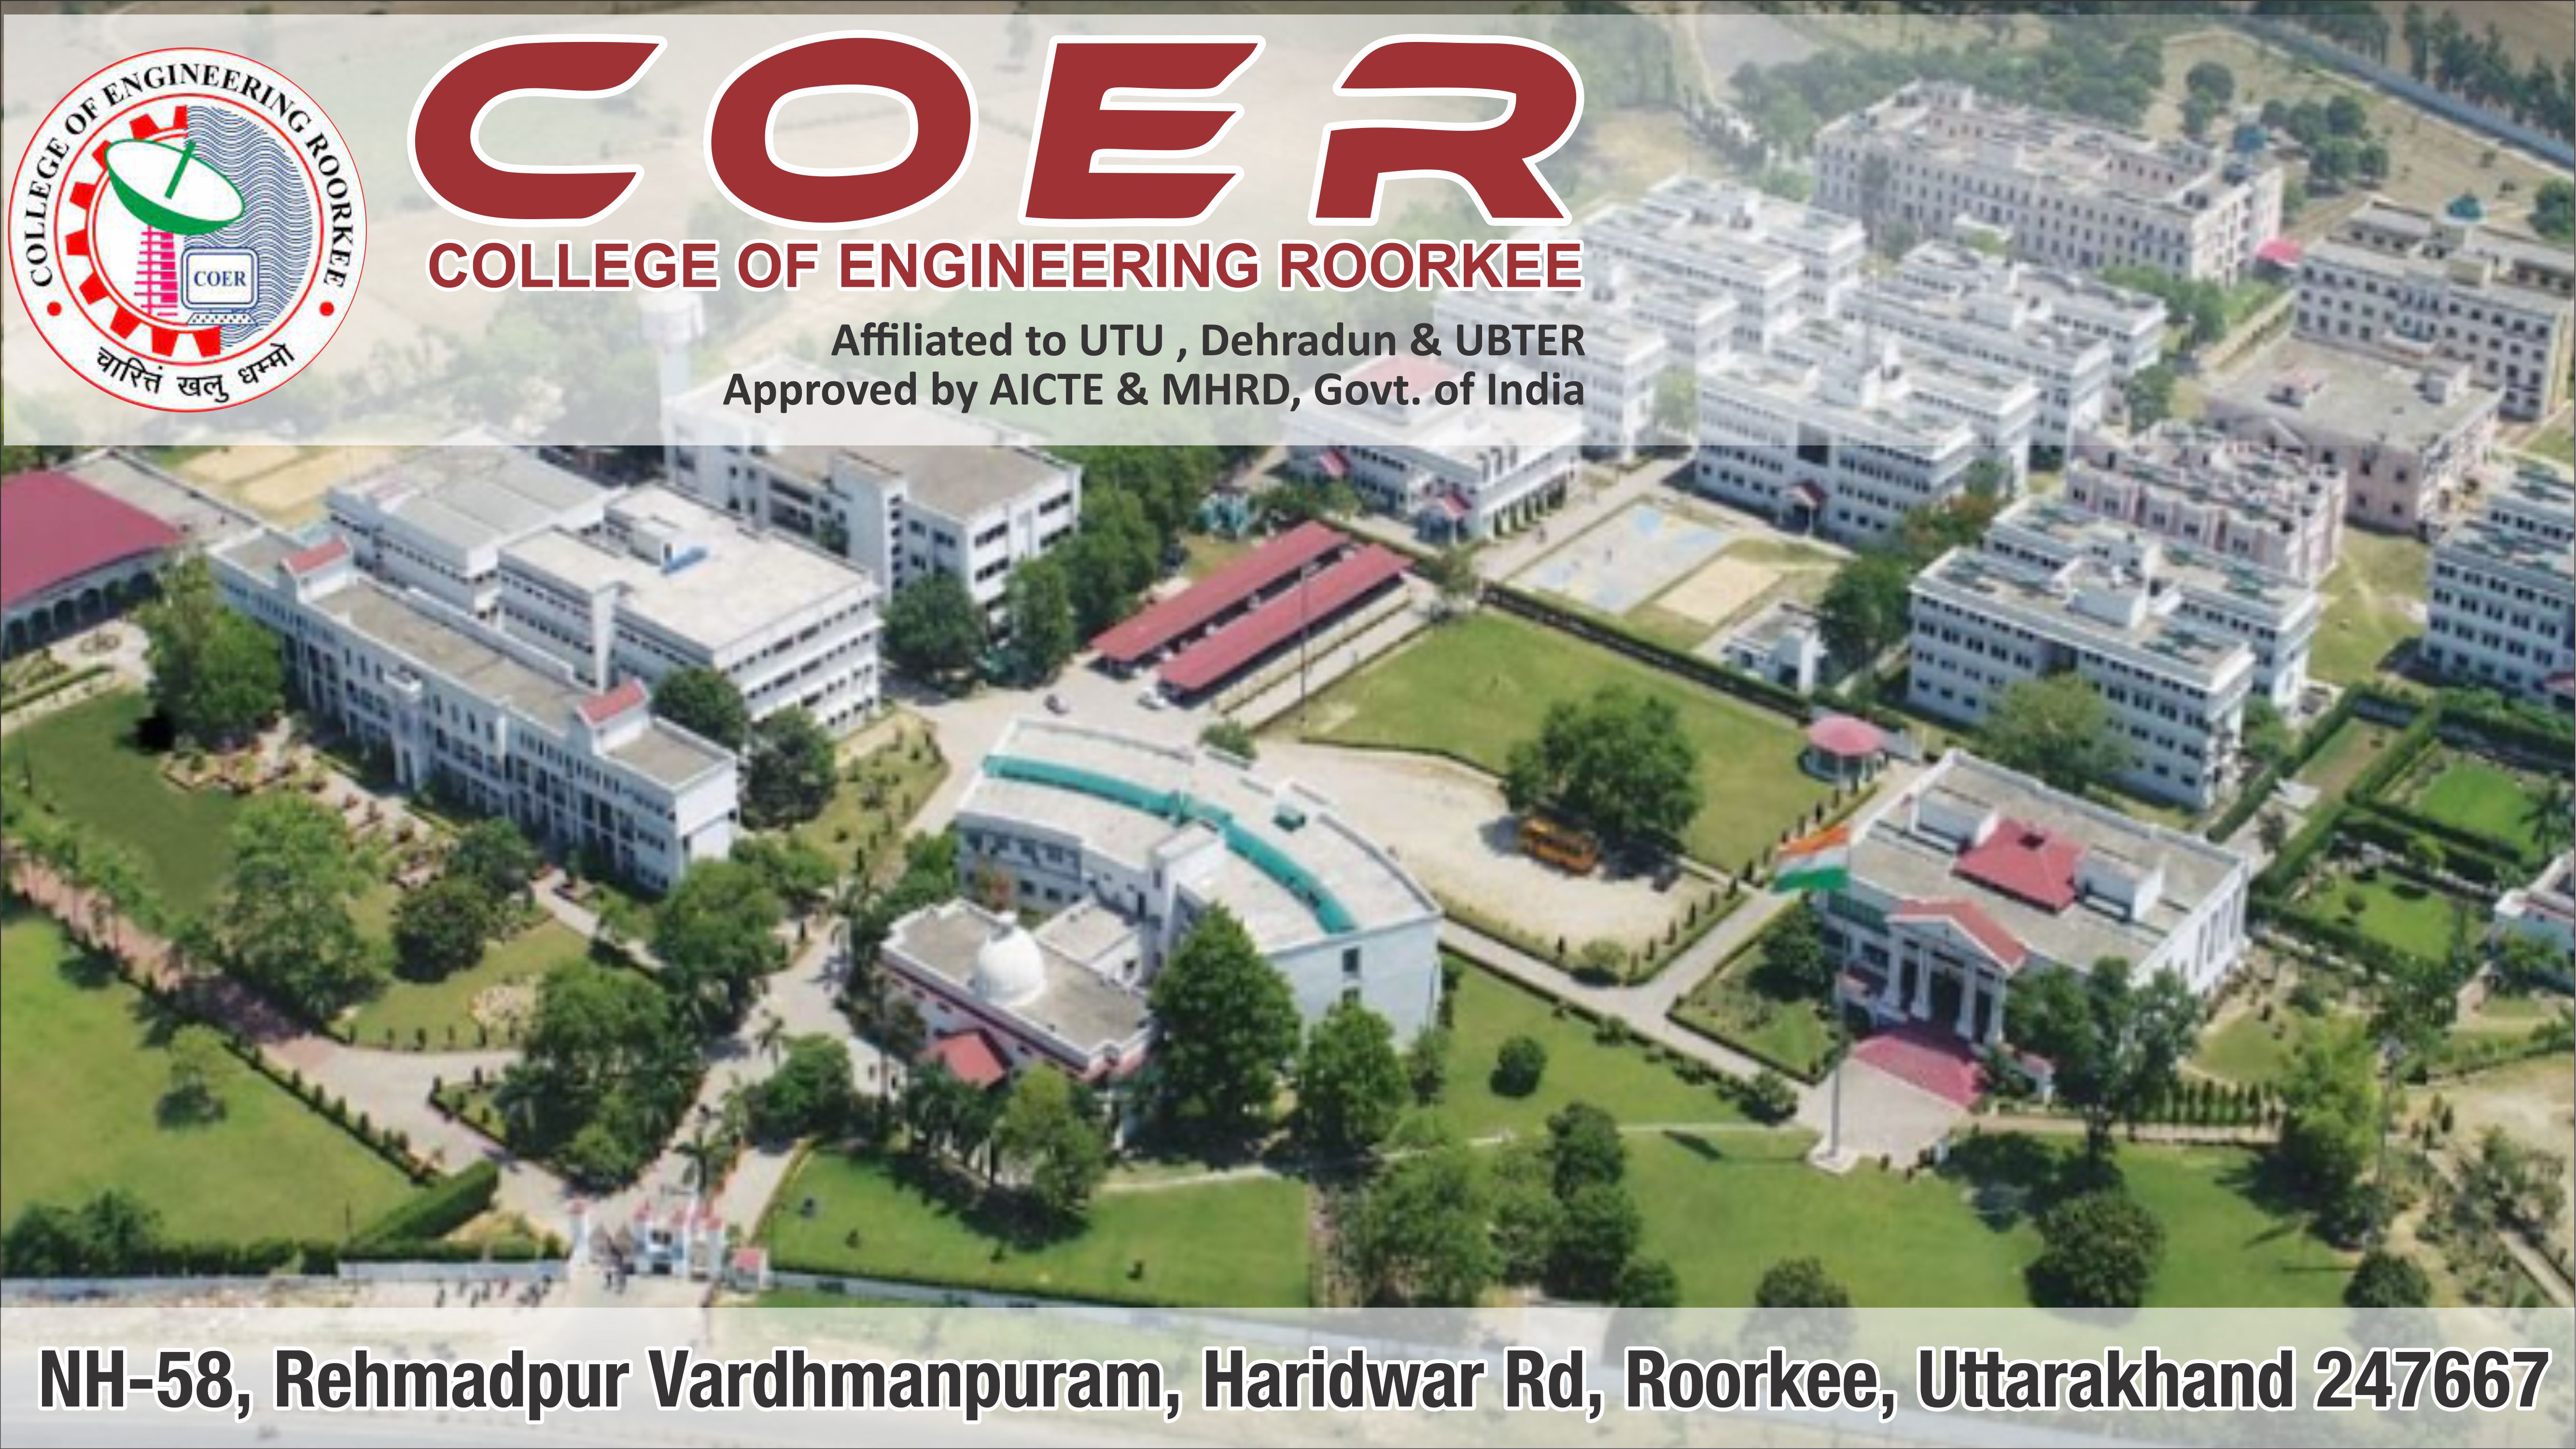 Out Side View of College of Engineering Roorkee (COER)